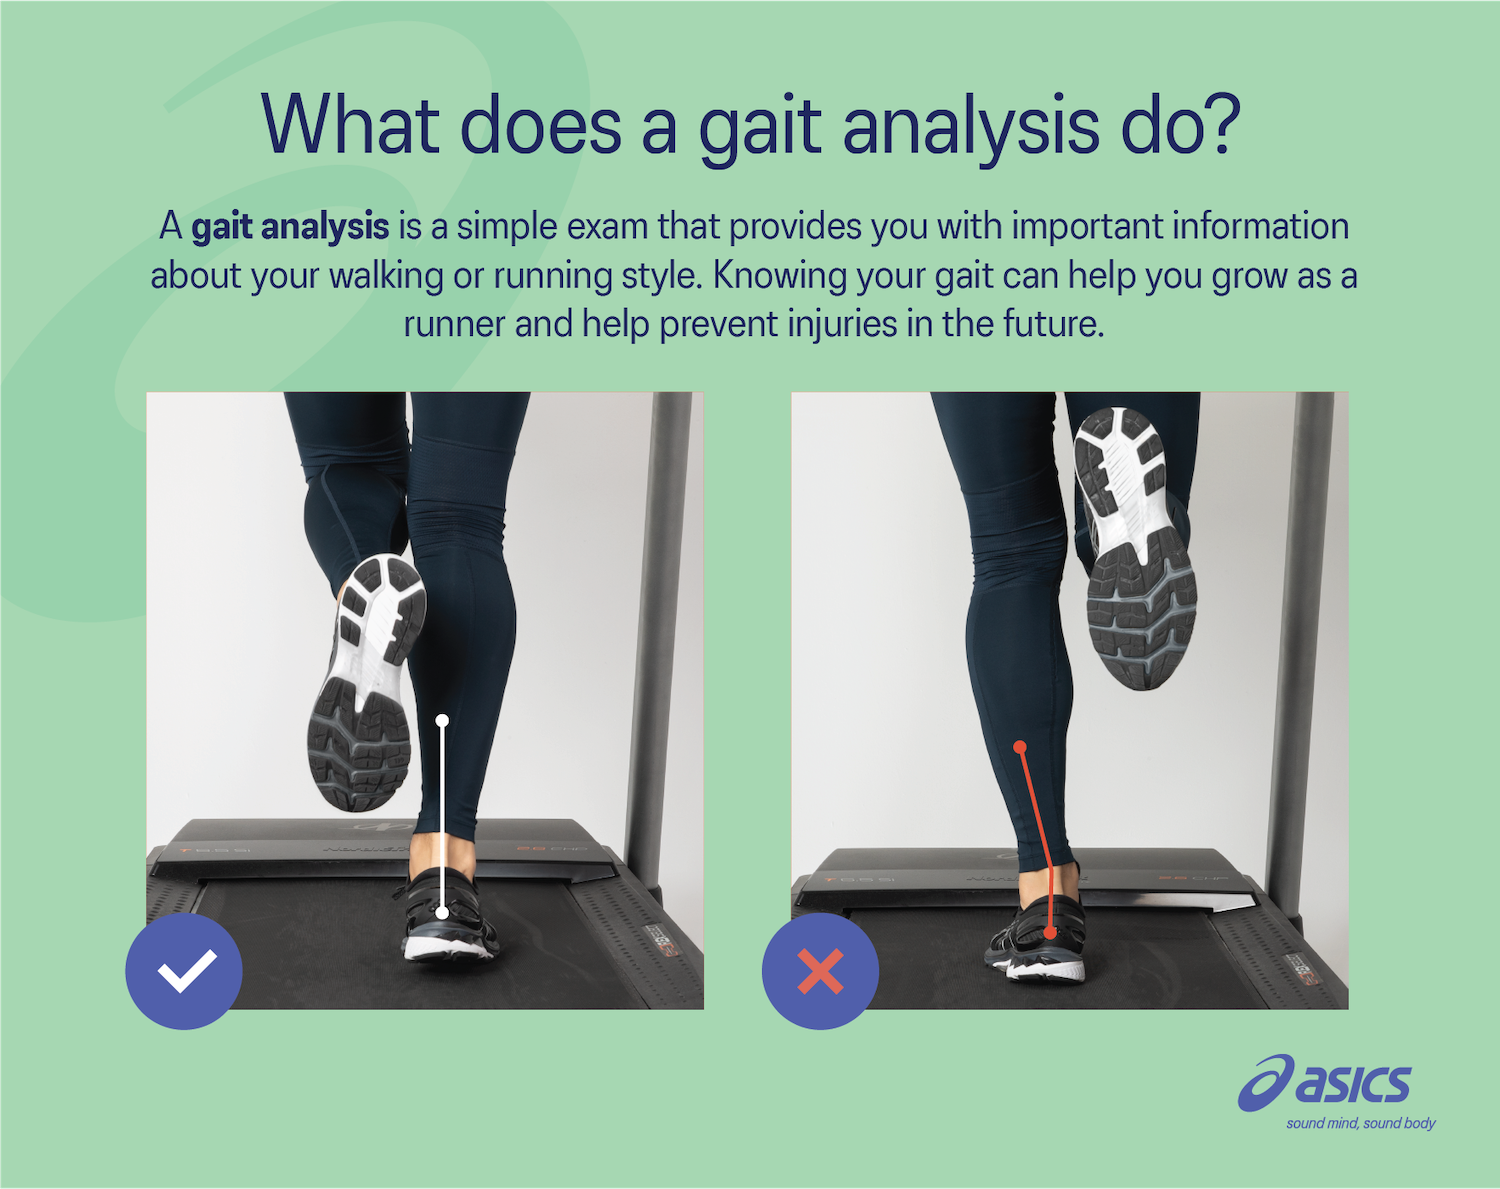 what does a gait analysis do?